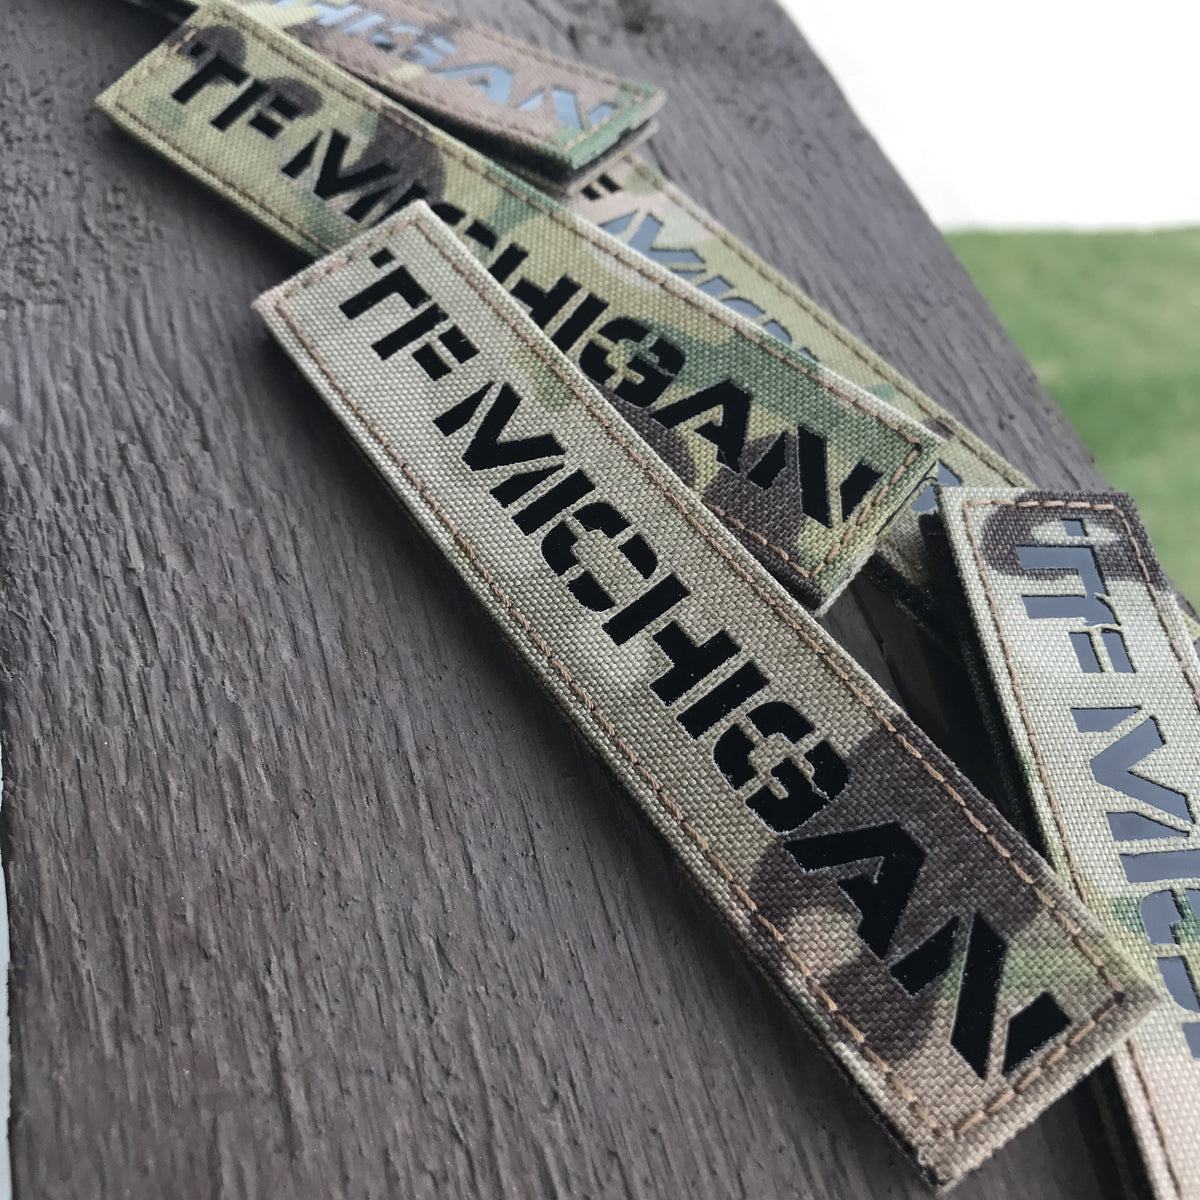 Custom IR Patches for any of your needs! — Keystone Tactical Supply